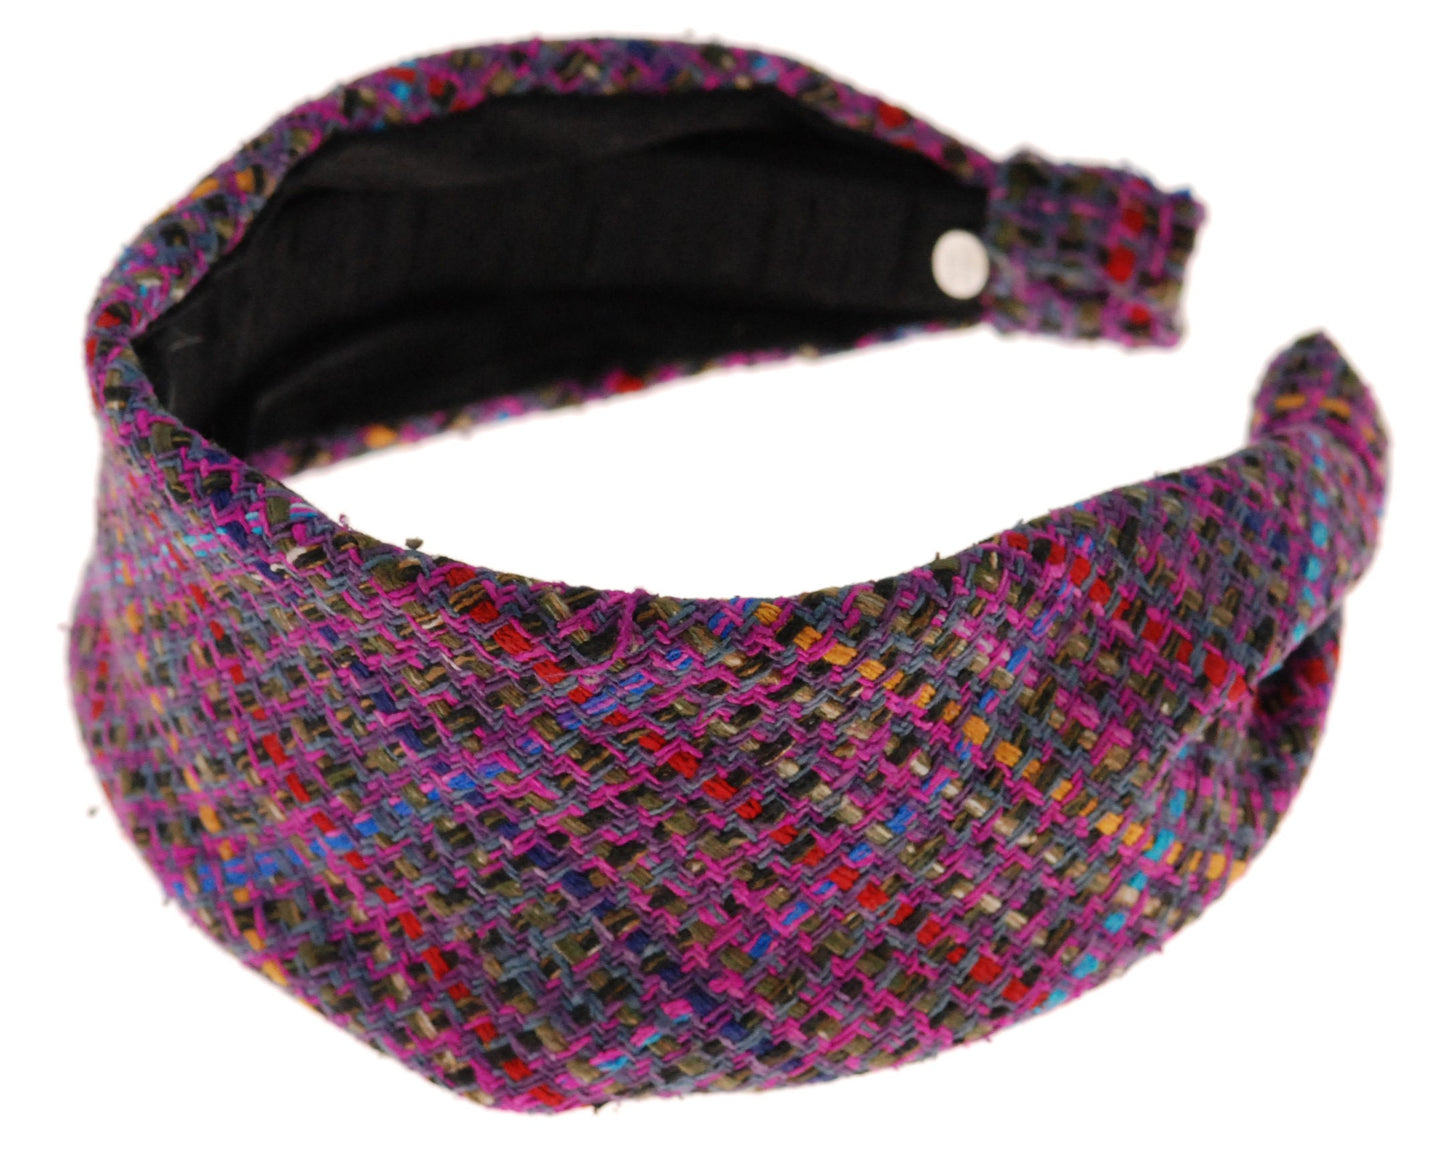 Karin's Garden 2 1/2"- 3" Tweed Scarf Headband lined with Black Silk Dupioni.  Handmade in the USA.  Available in Purple or Blue Print